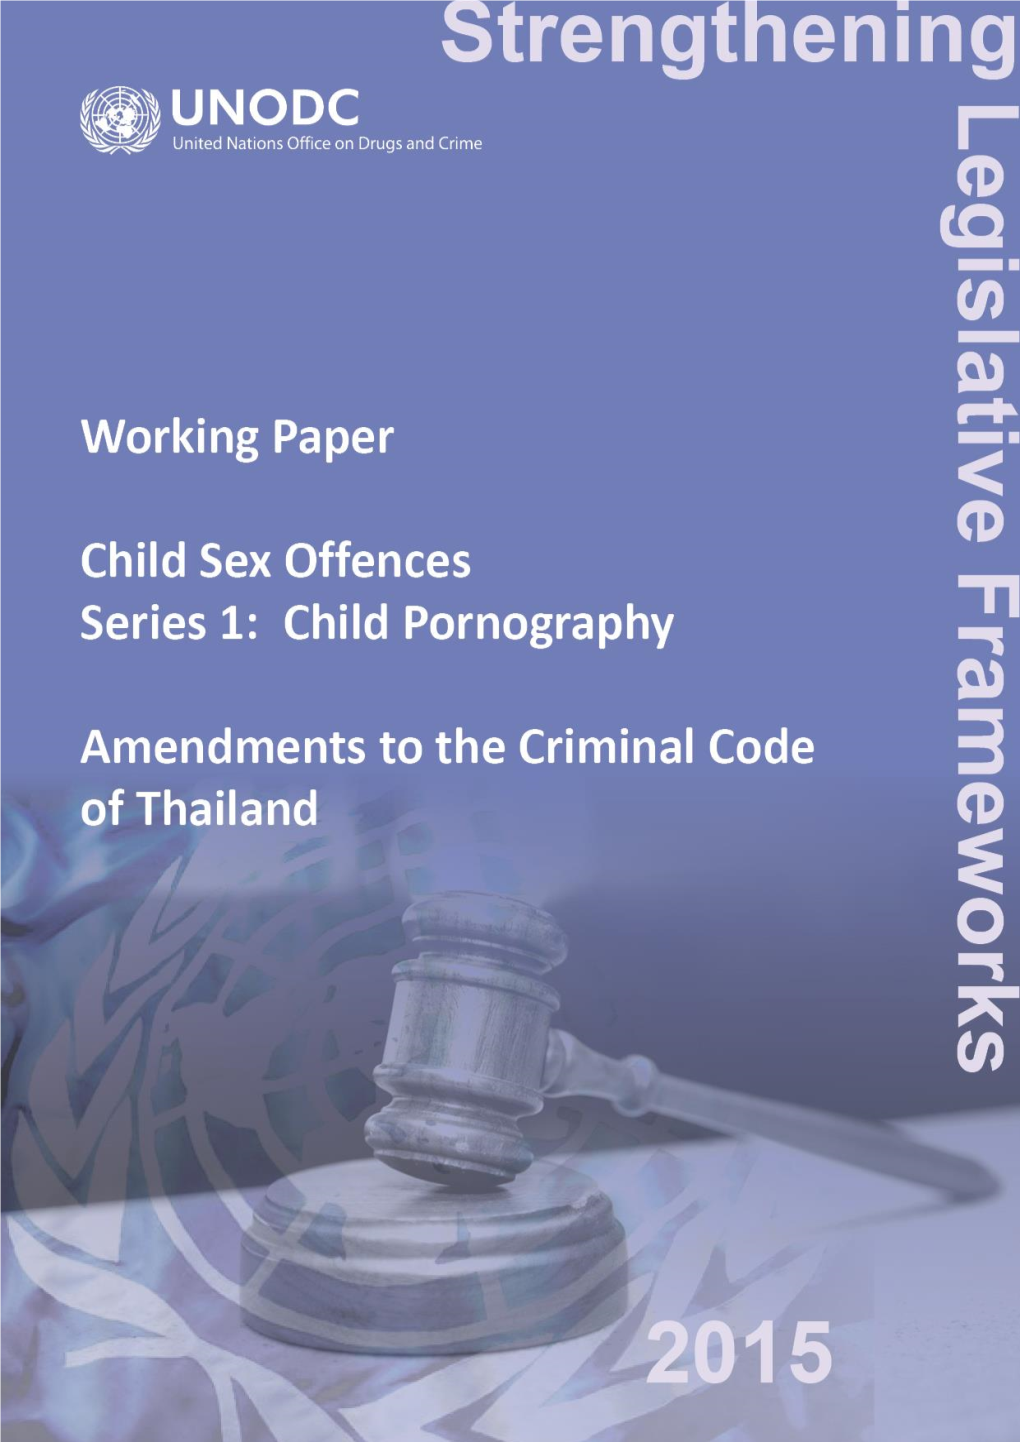 Working Paper Child Sex Offences Series 1: Child Pornography